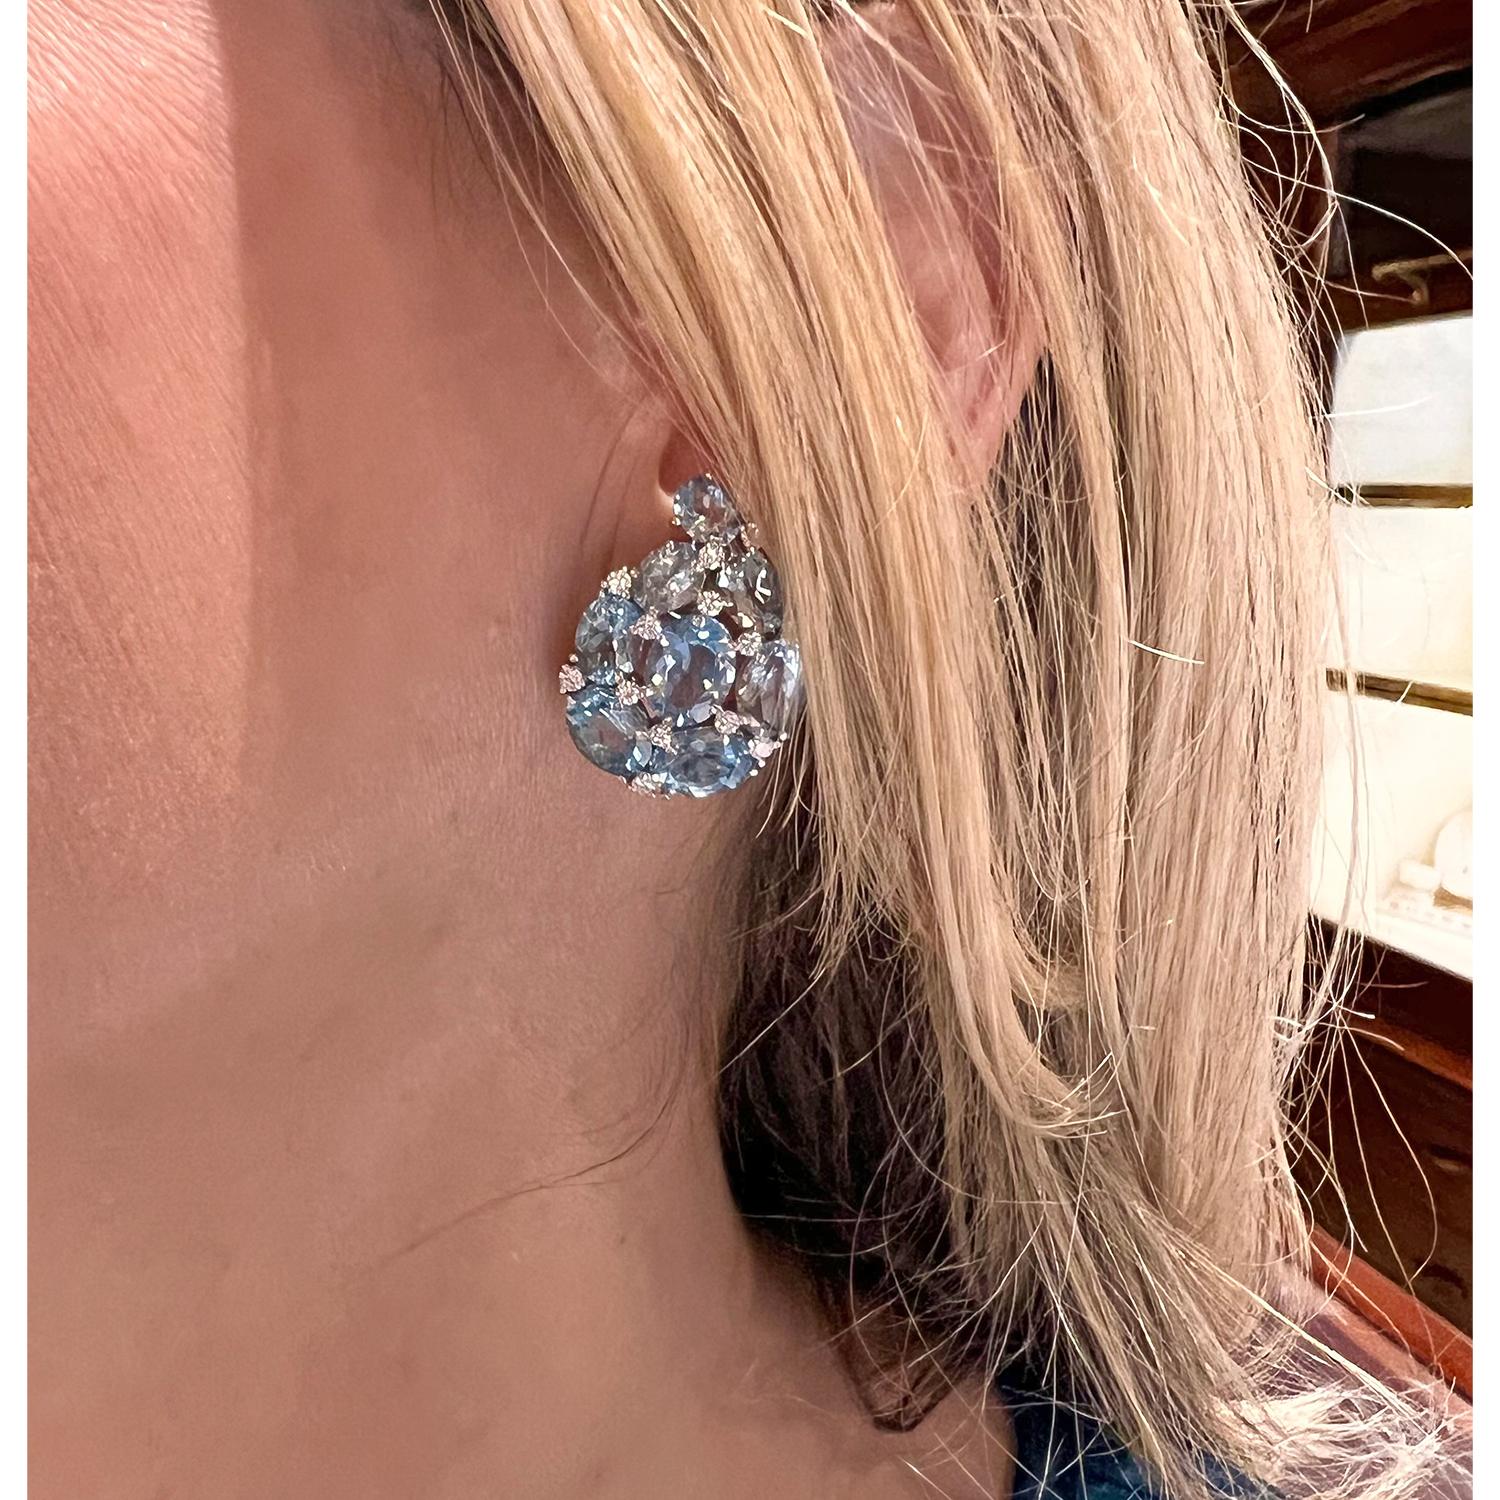 Verdura aquamarine and diamond 'Paisley' cluster earrings, handmade in 18k white gold. Sixteen aquamarines weighing 17.38 total carats. Twenty-six round brilliant-cut diamonds weighing 0.88 total carats. Clip backs (posts may be added upon request).